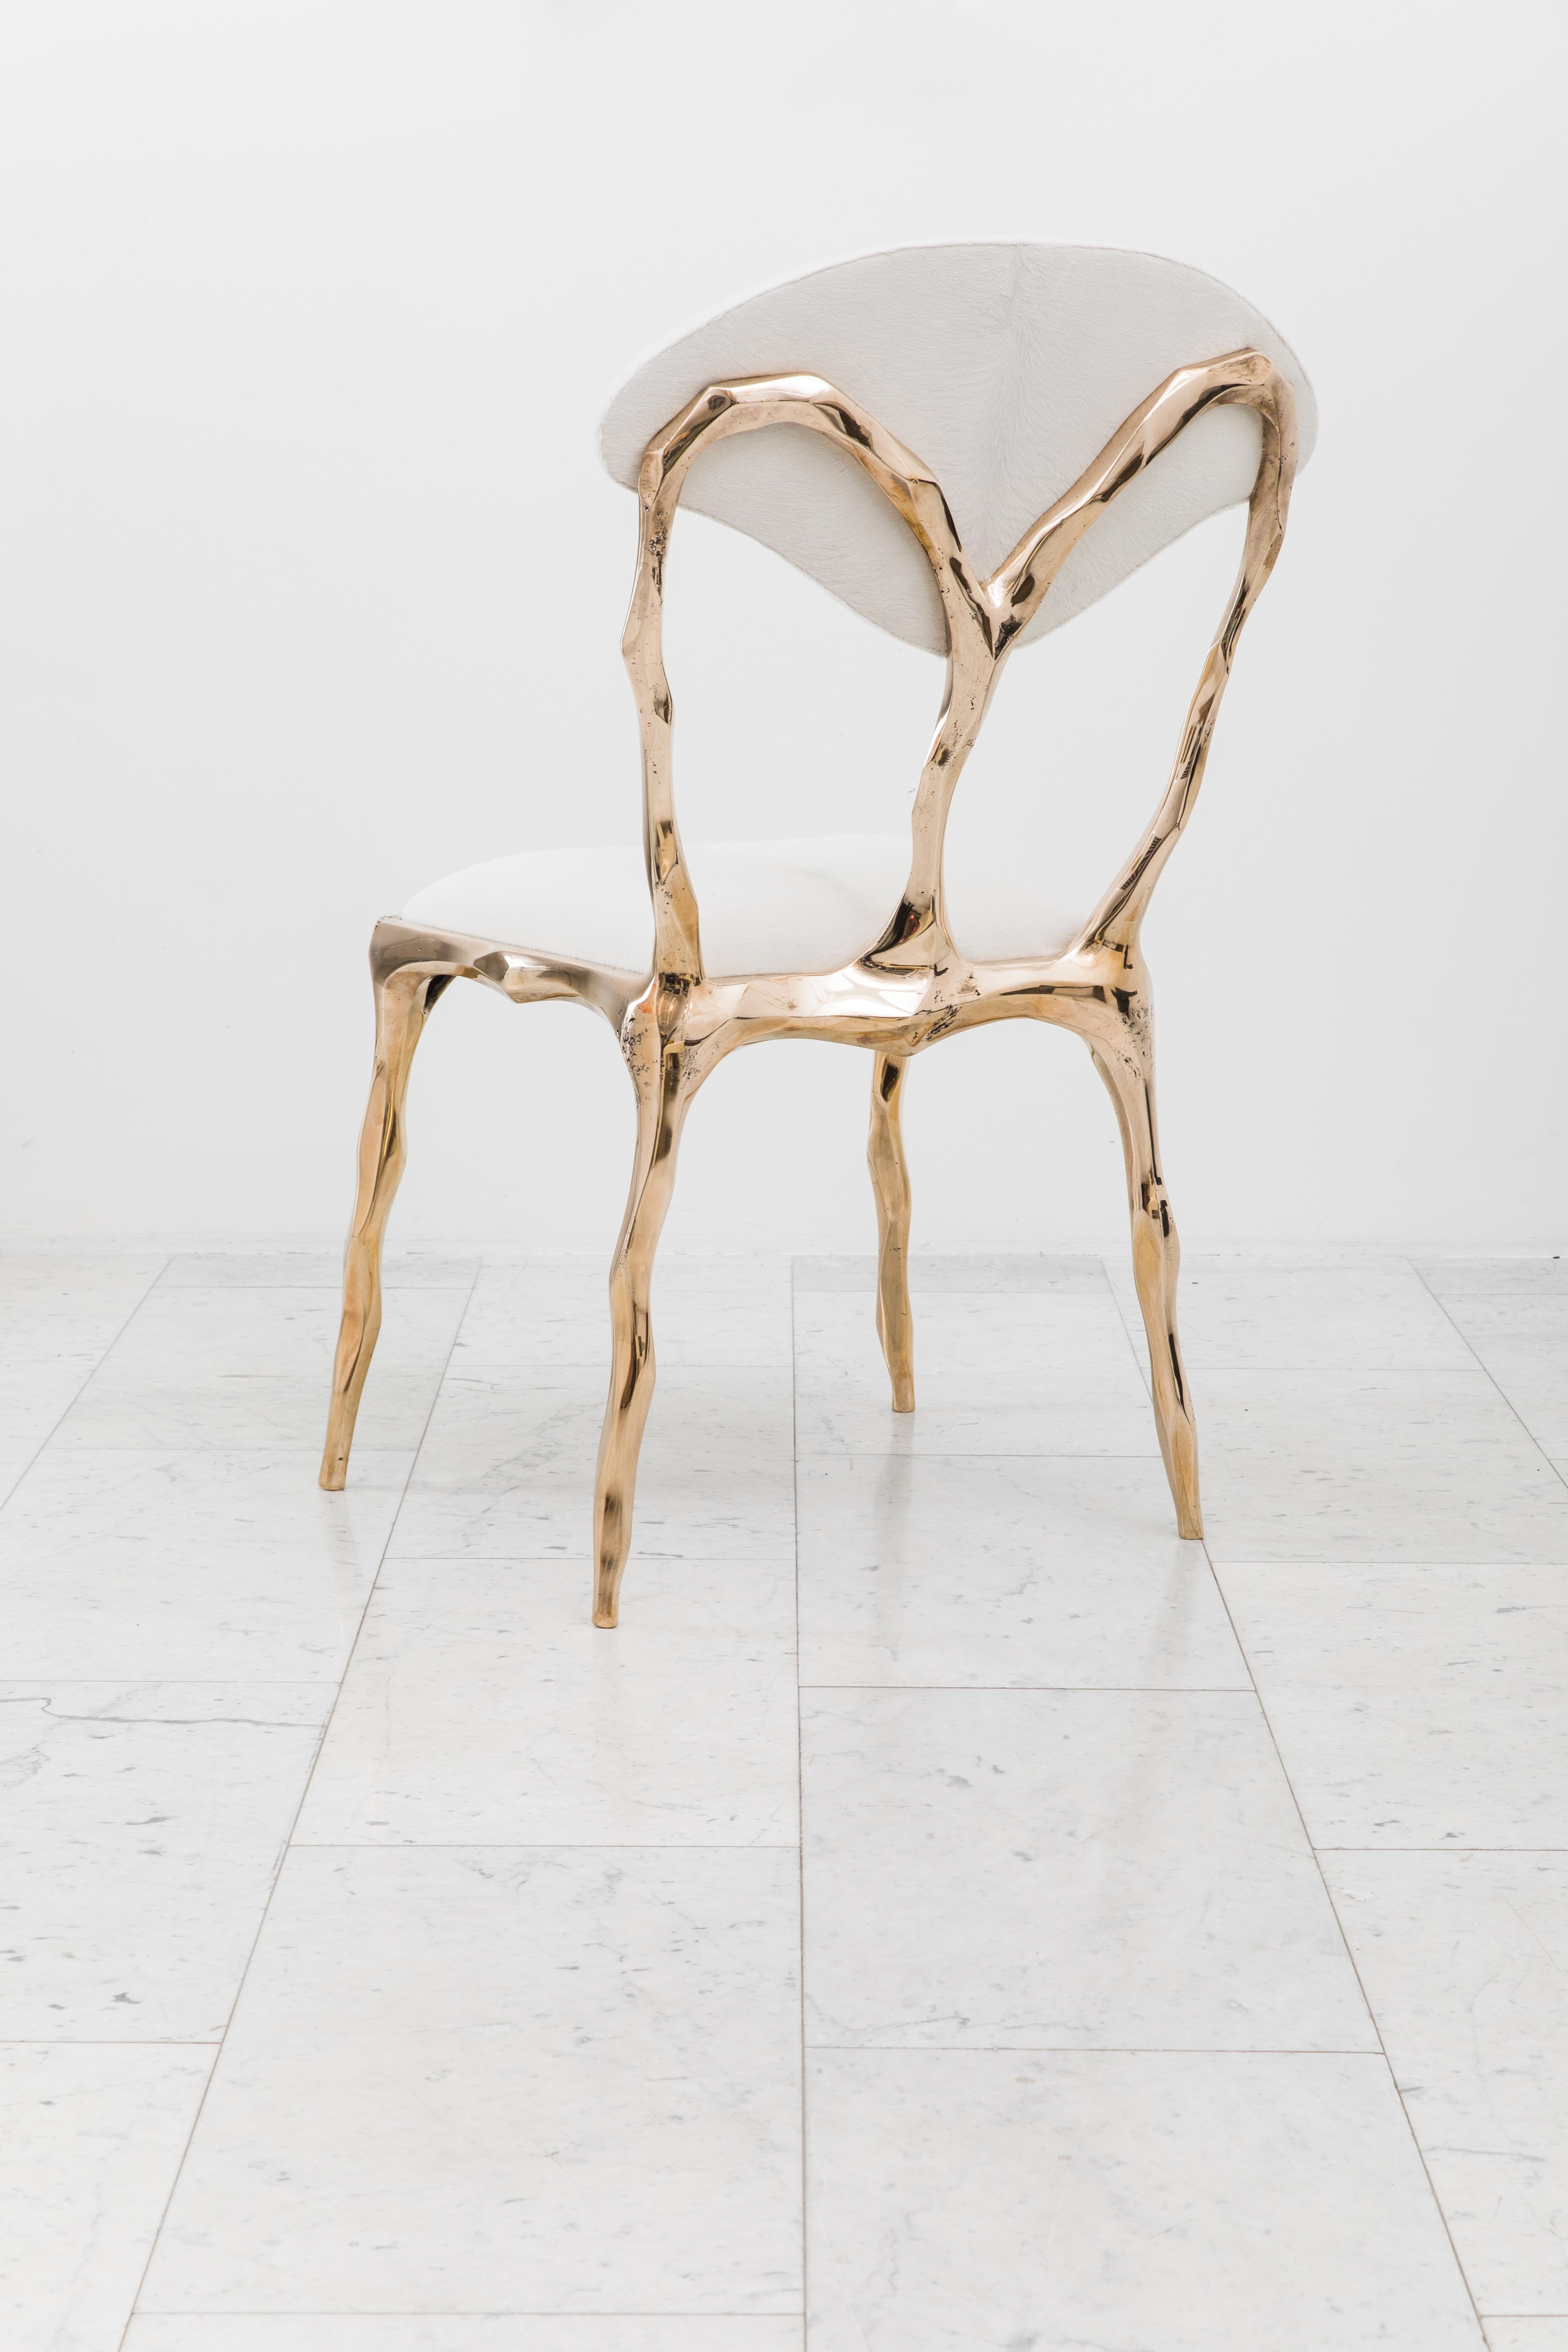 Contemporary Markus Haase, Faceted Bronze Dining Chair, USA, 2018 For Sale